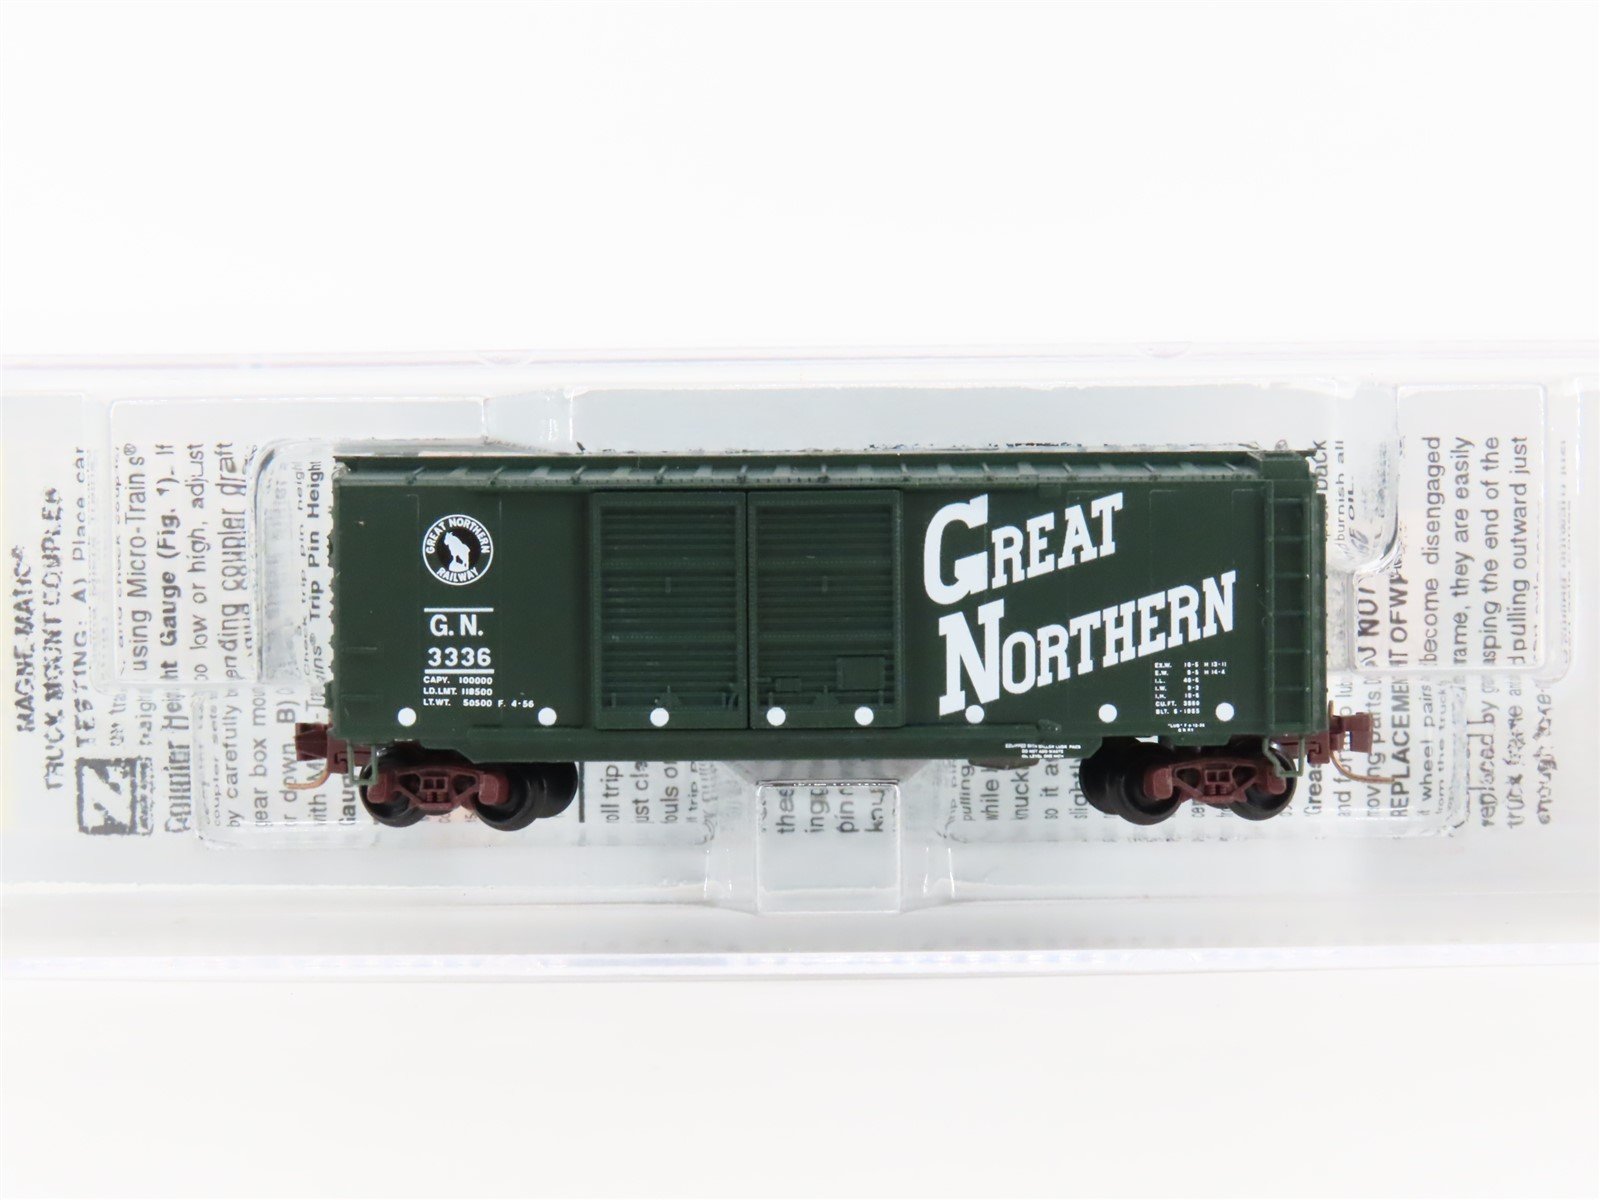 Z Scale Micro-Trains MTL 50100260 GN Great Northern "Goat" 40' Box Car #3336